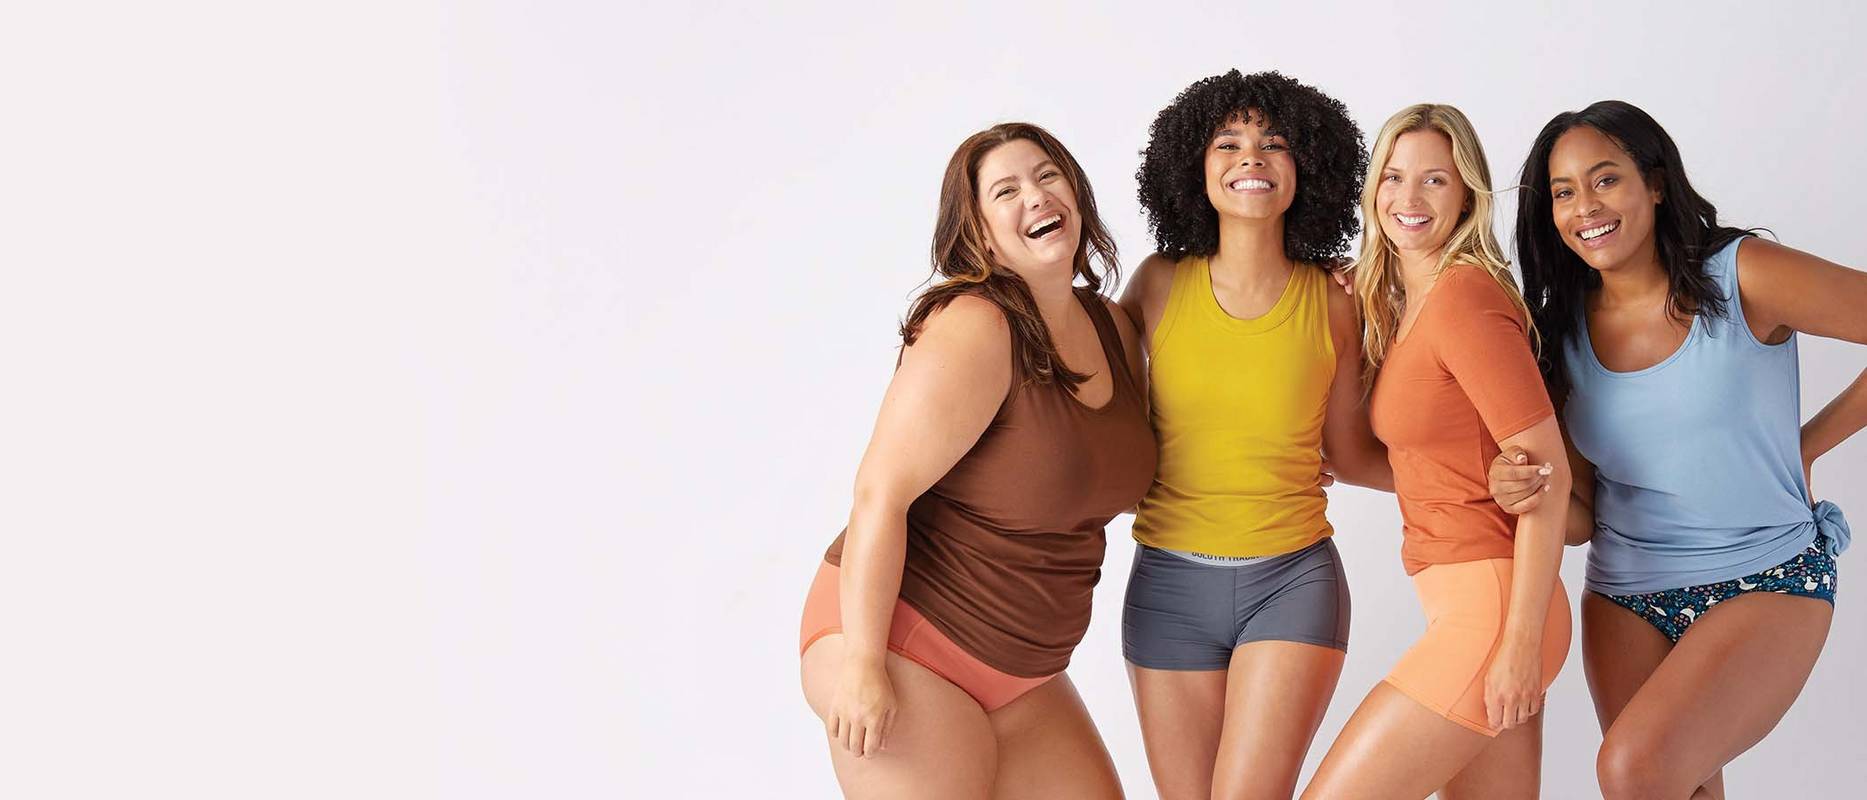 four women standing in their underwear and laughing together against a light studio background